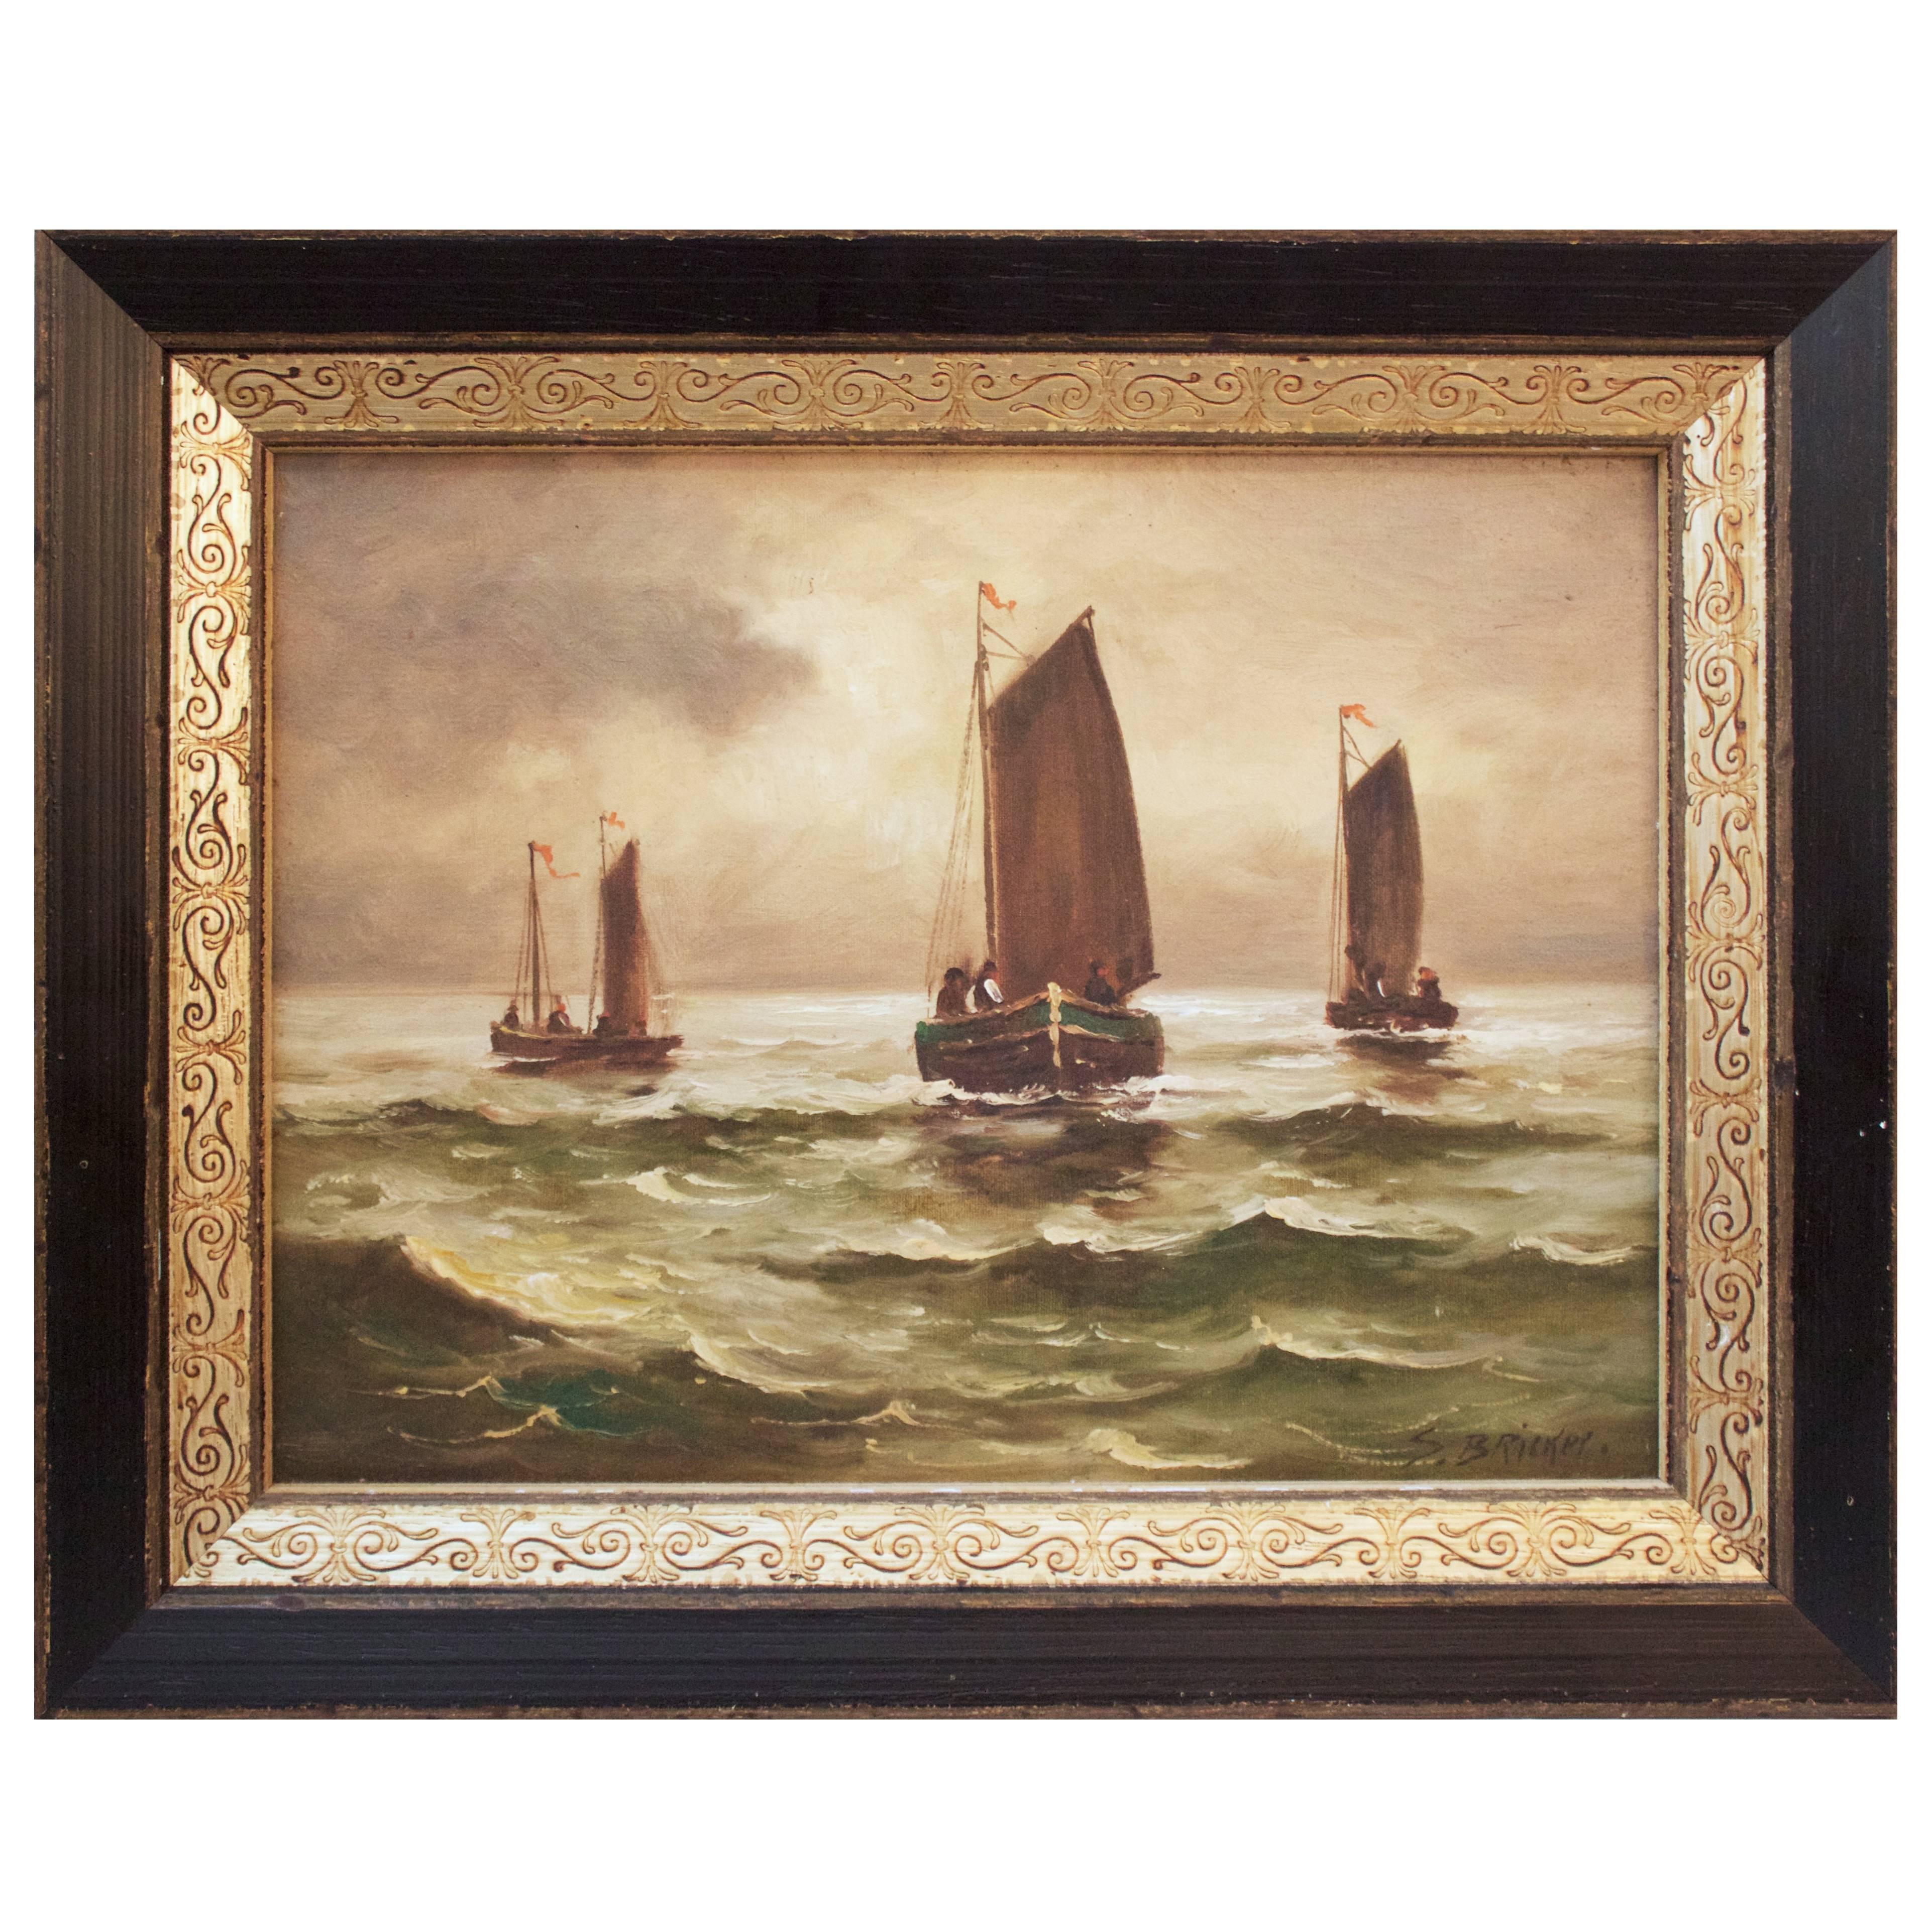 19th Century Dutch Oil Painting "Boats at Sea" by S. Bricker For Sale